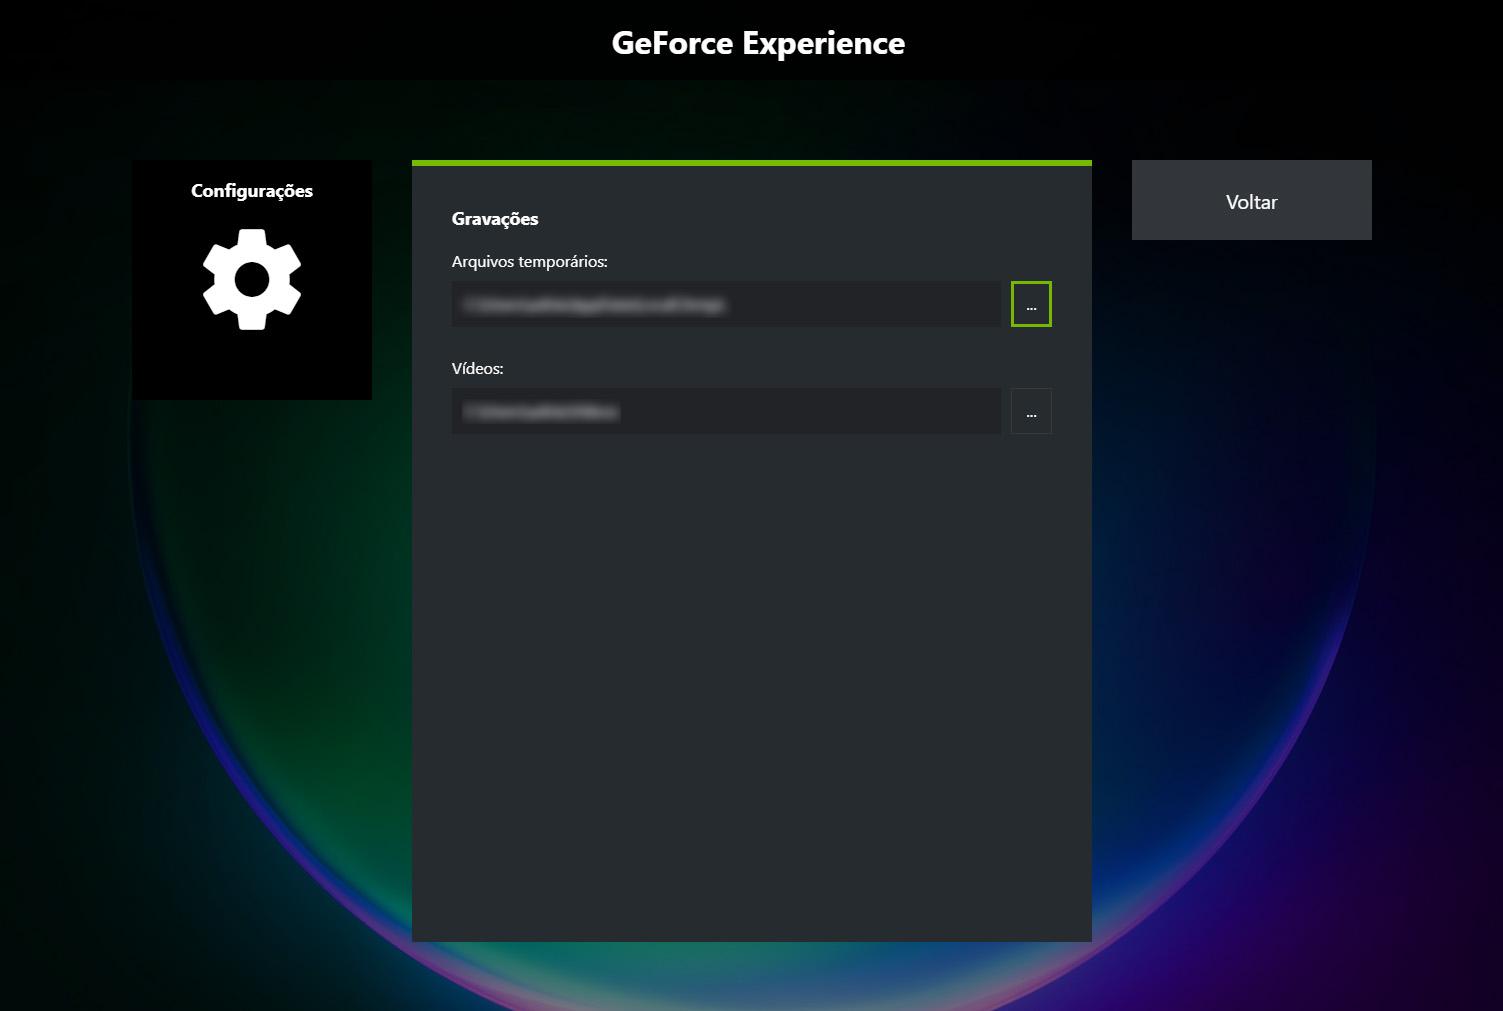 In the “Recordings” menu it is possible to choose where to store the video captures (Source: GeForce Experience/Playback)